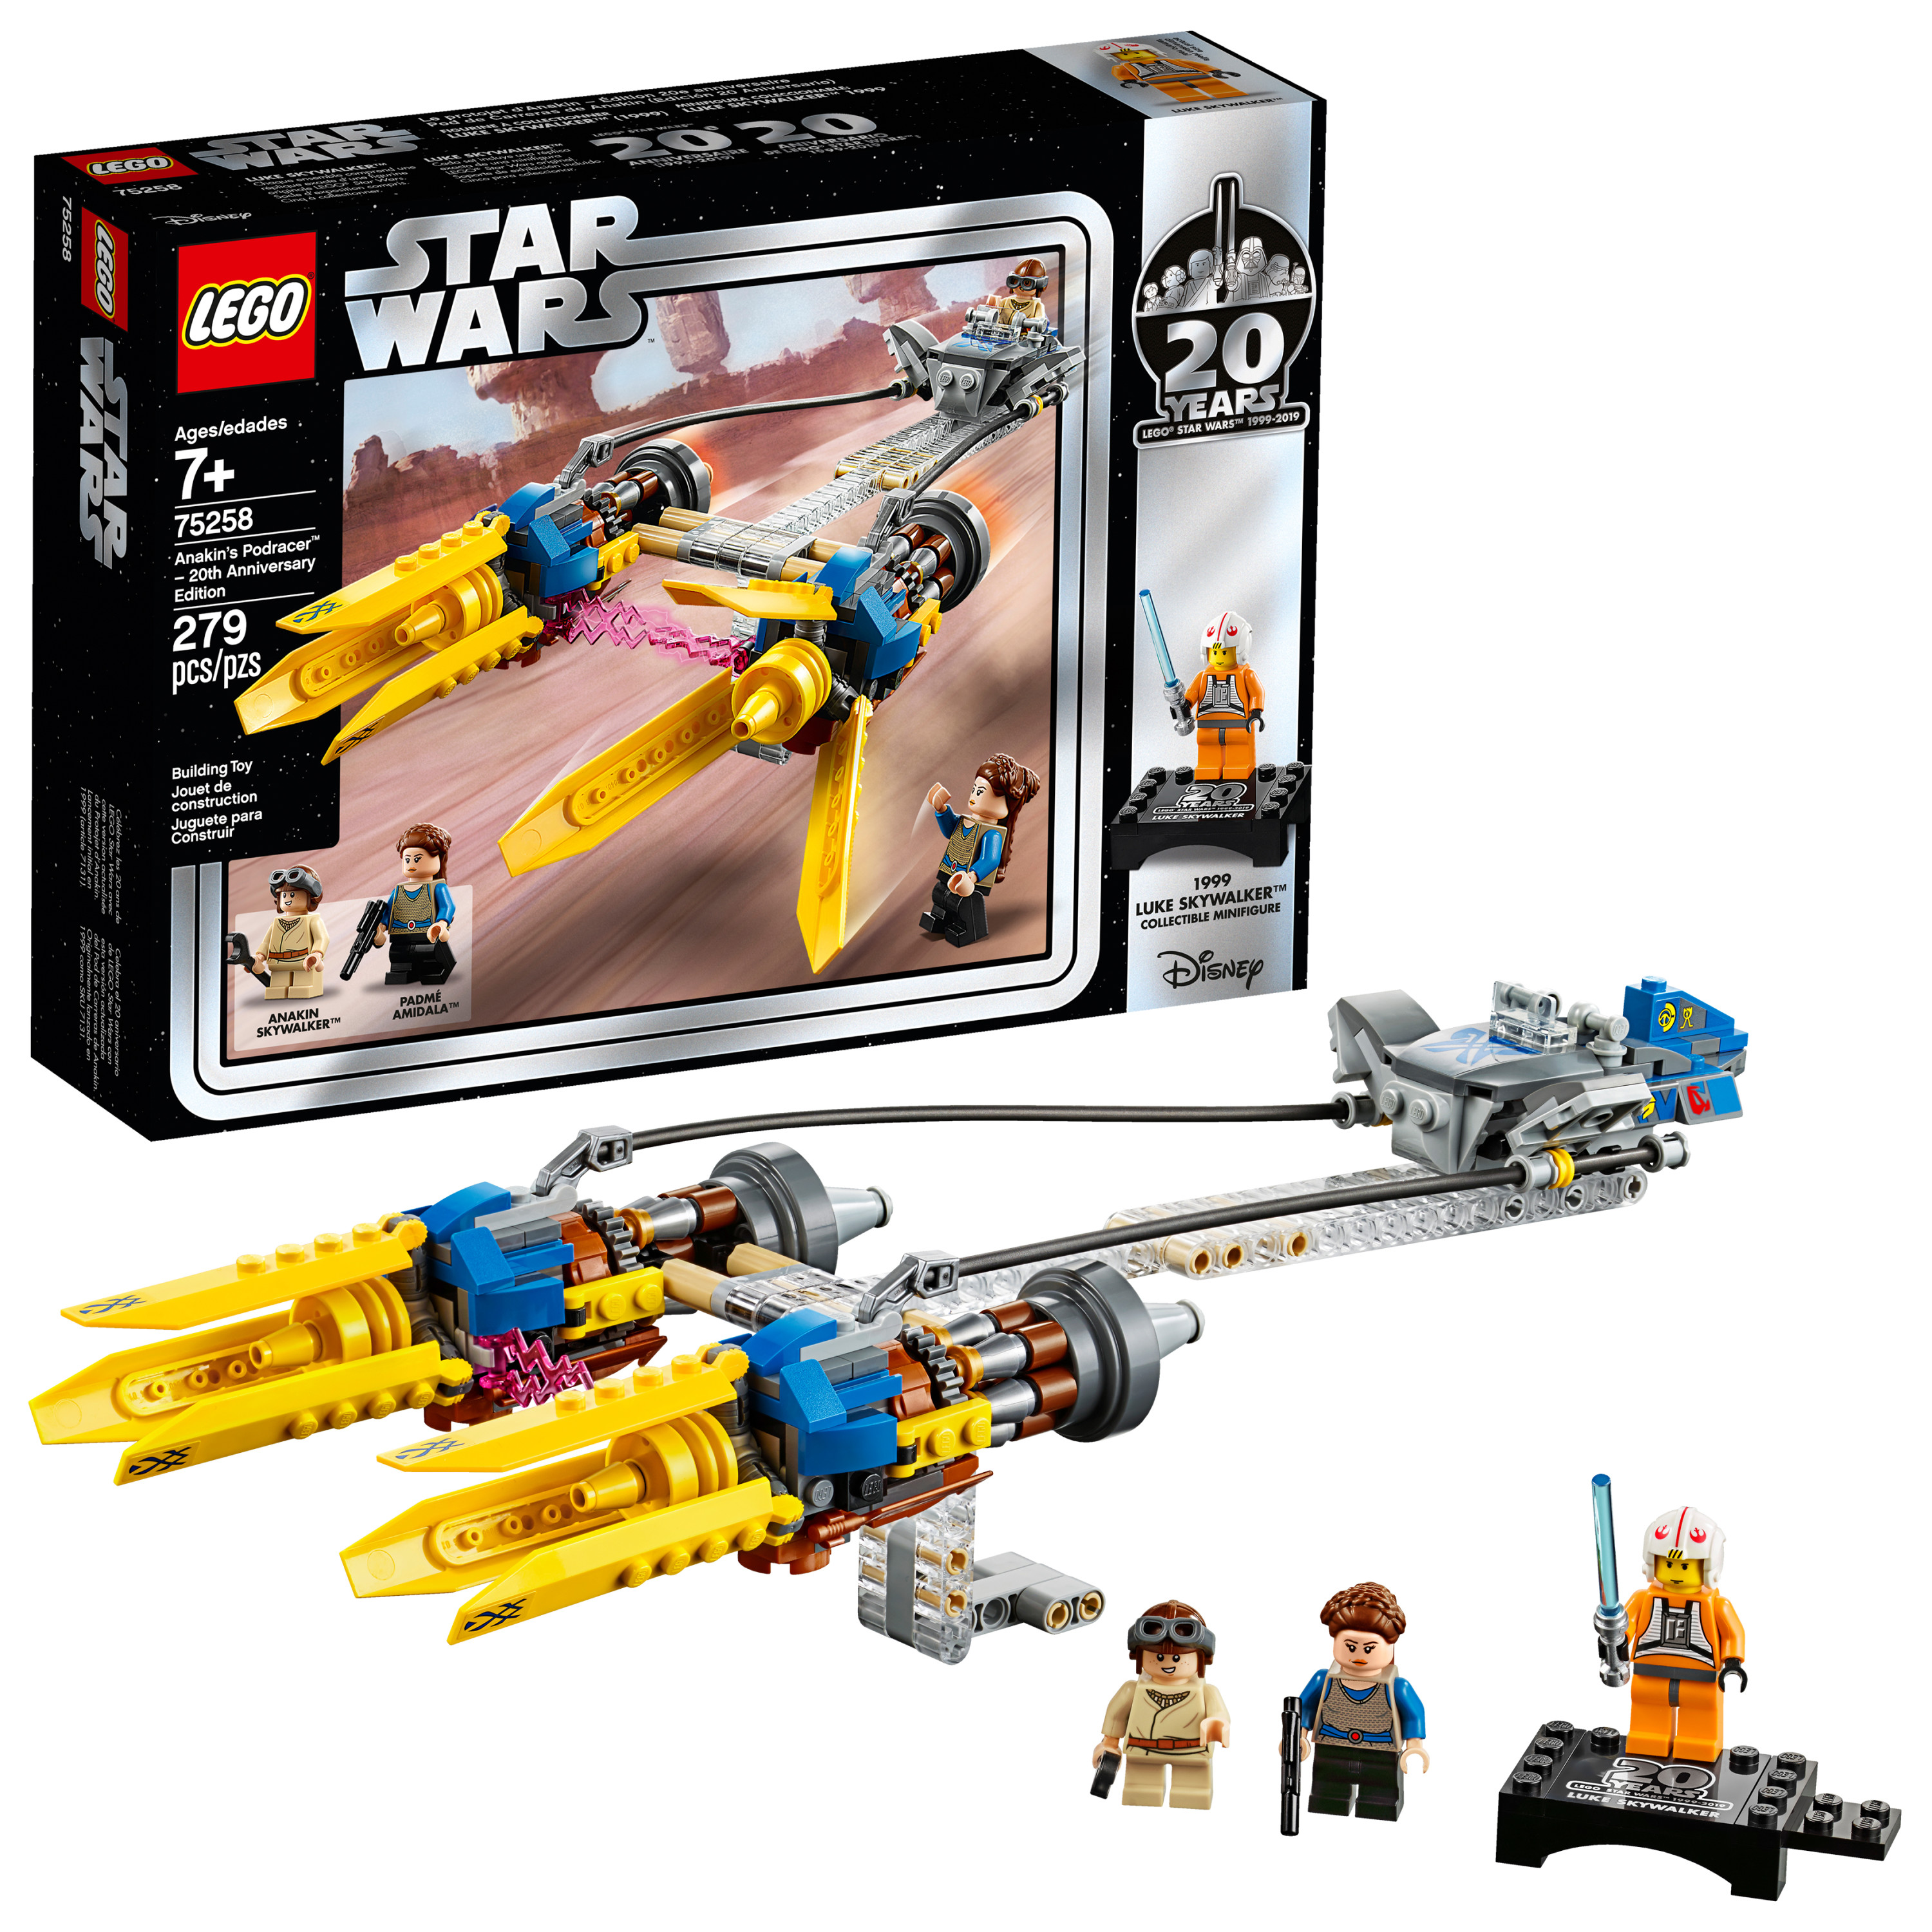 LEGO Star Wars 20th Anniversary Edition Anakin's Podracer Vehicle Building Set 75258 - image 1 of 6